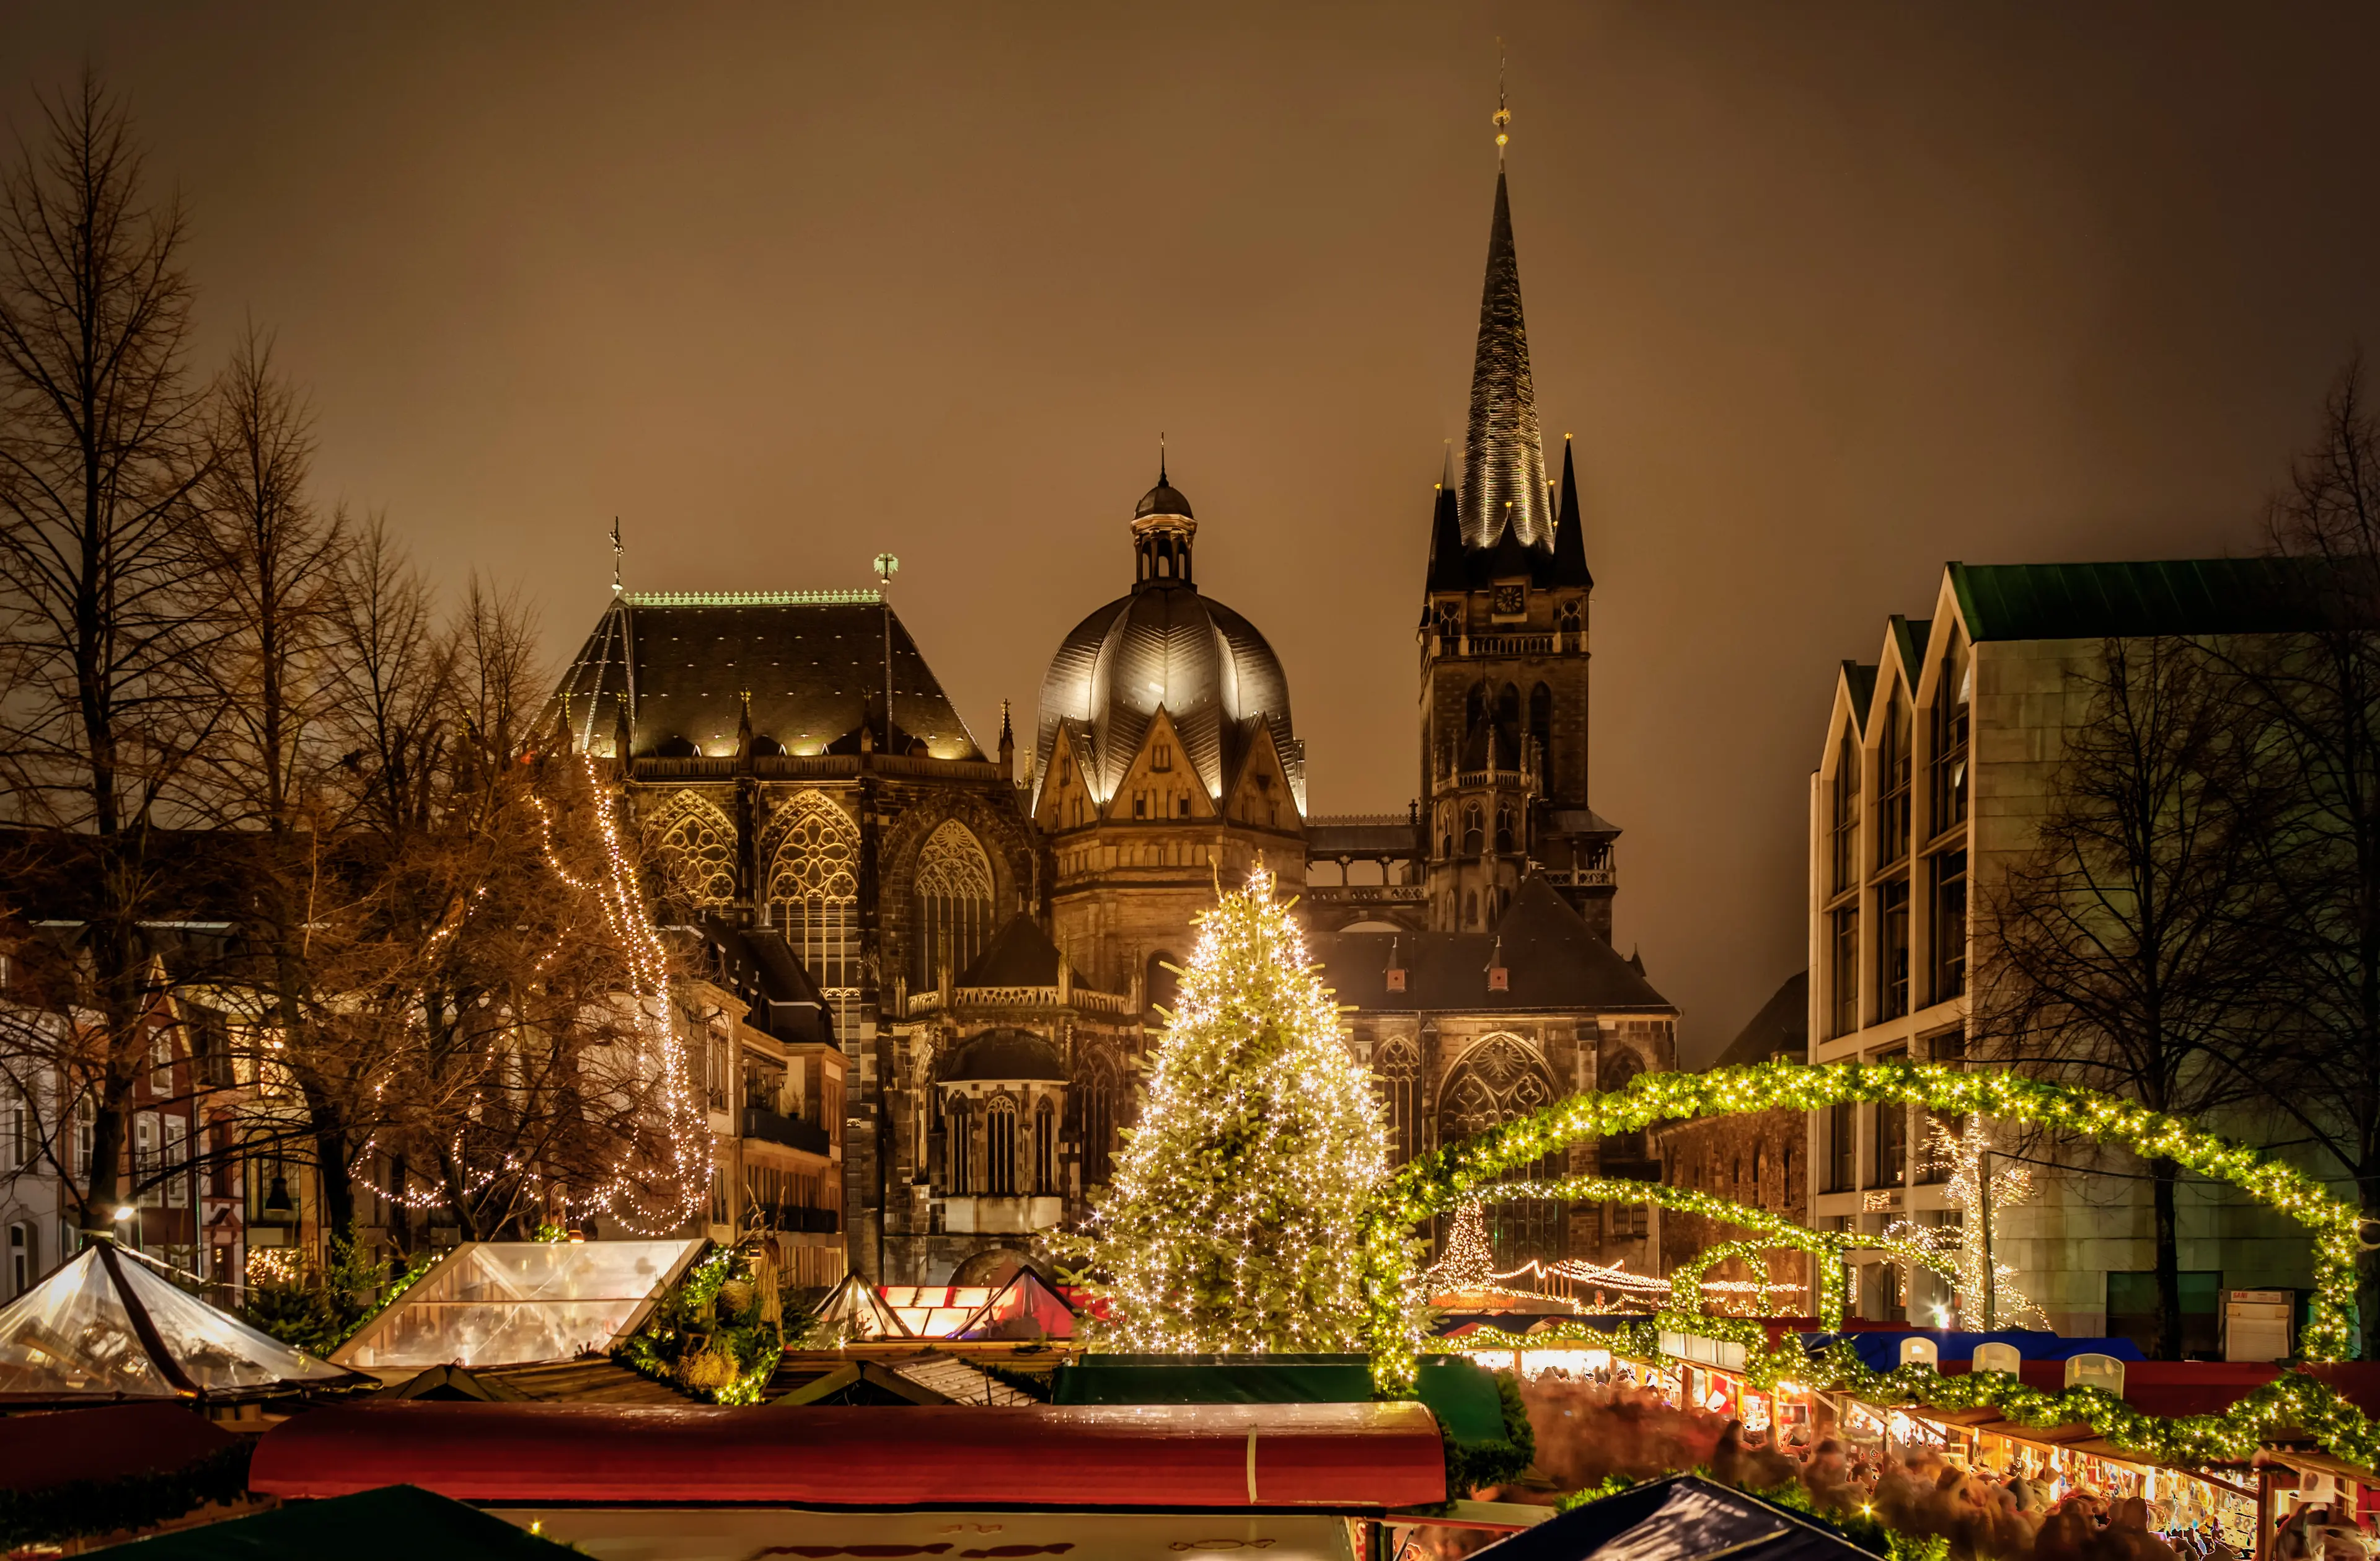 5-Day Family Christmas Holiday Itinerary in Aachen, Germany